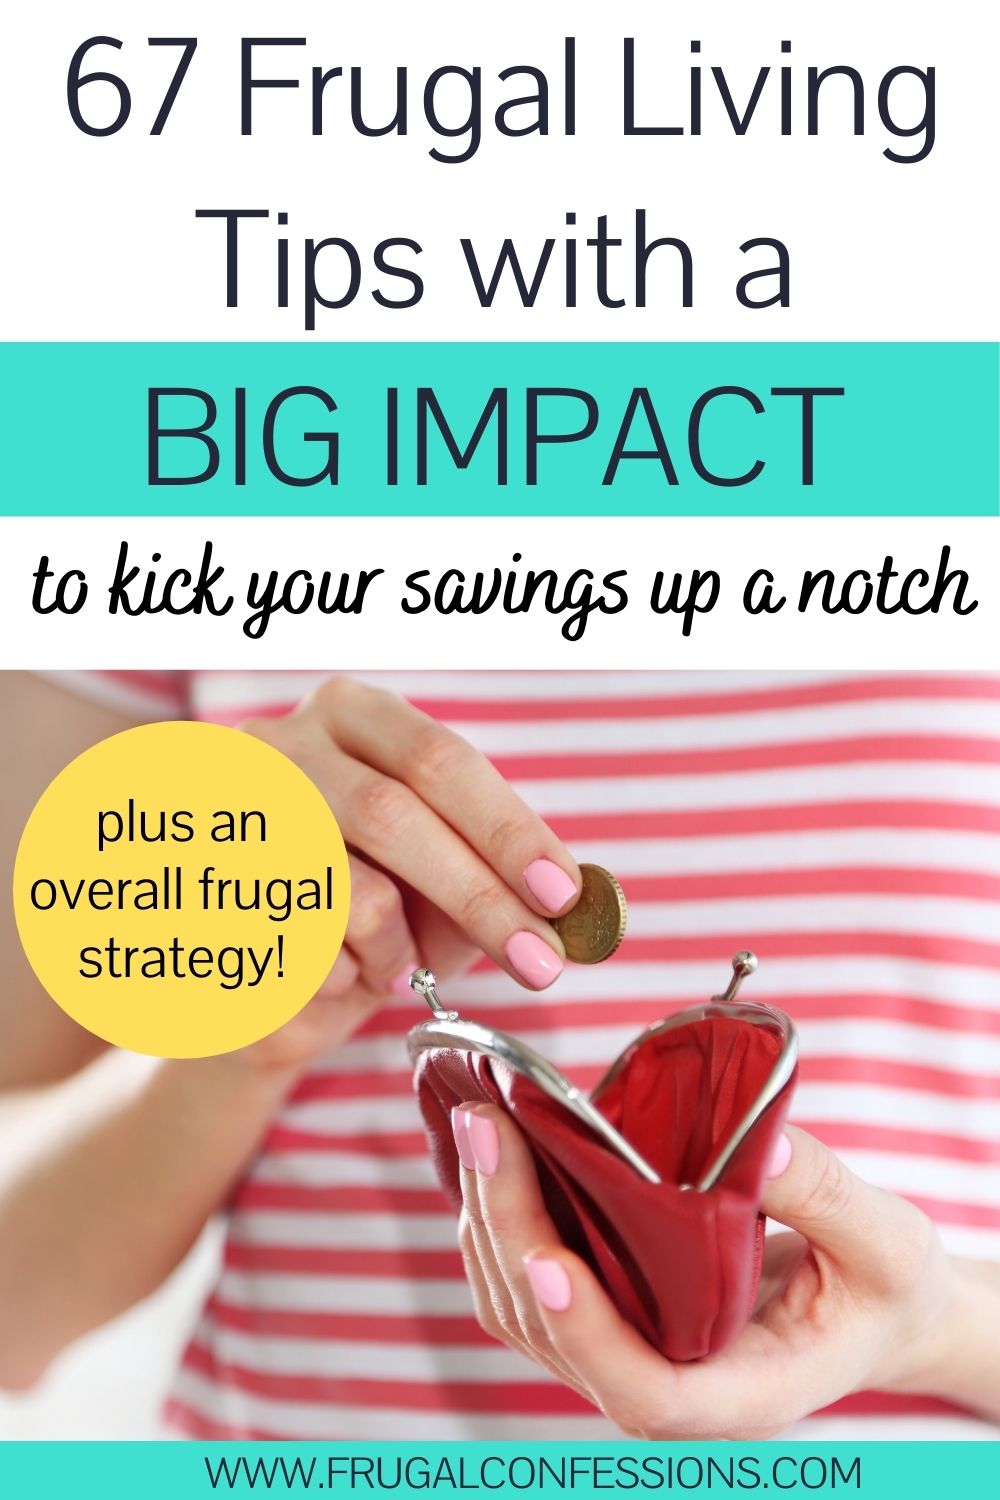 woman in red striped shirt putting coin into coin purse, text overlay "67 frugal living tips with a big impact to kick your savings up a notch"